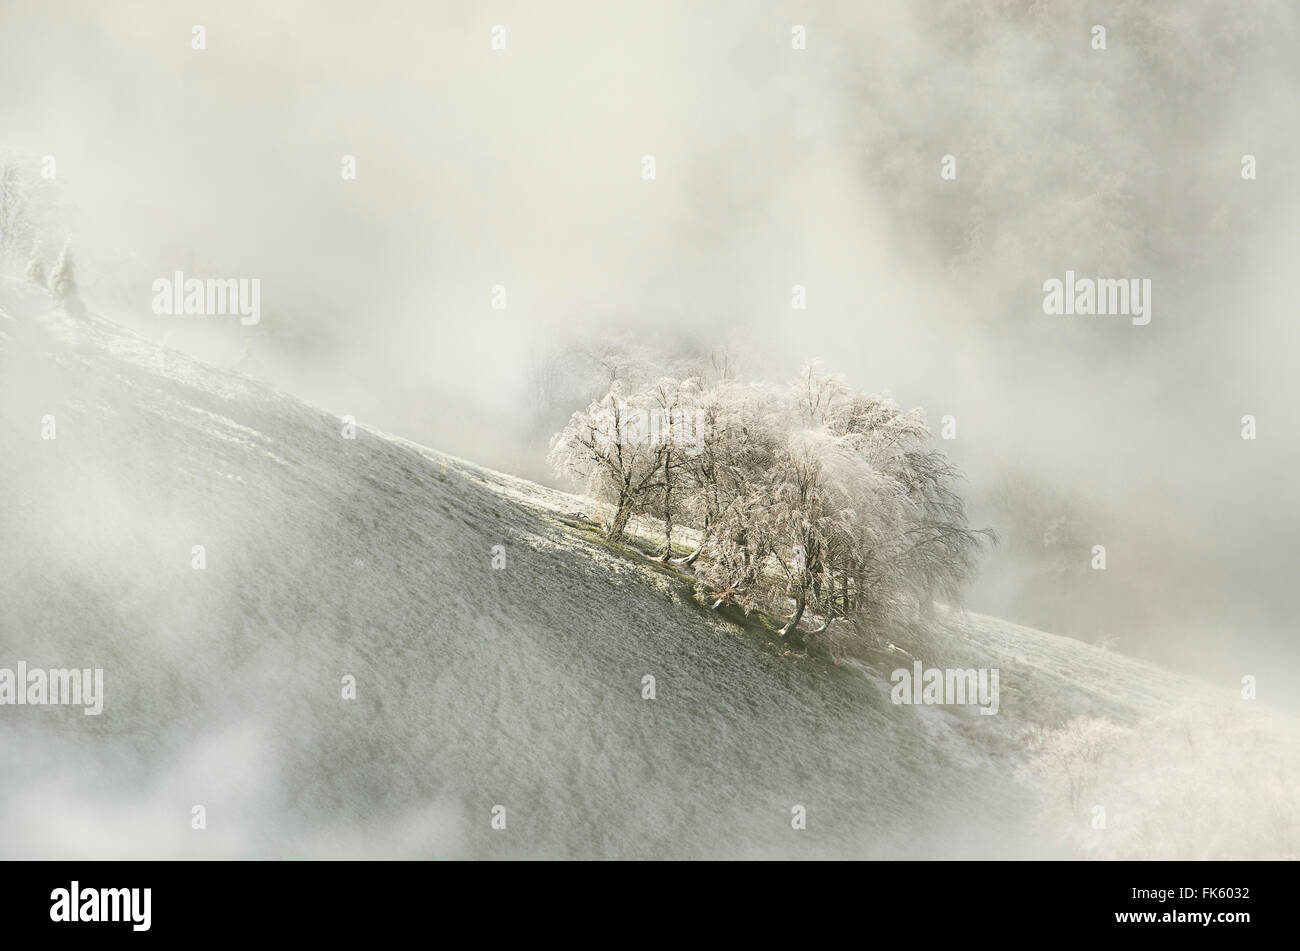 Dramatic clouds over old trees in the snowy mountains Stock Photo